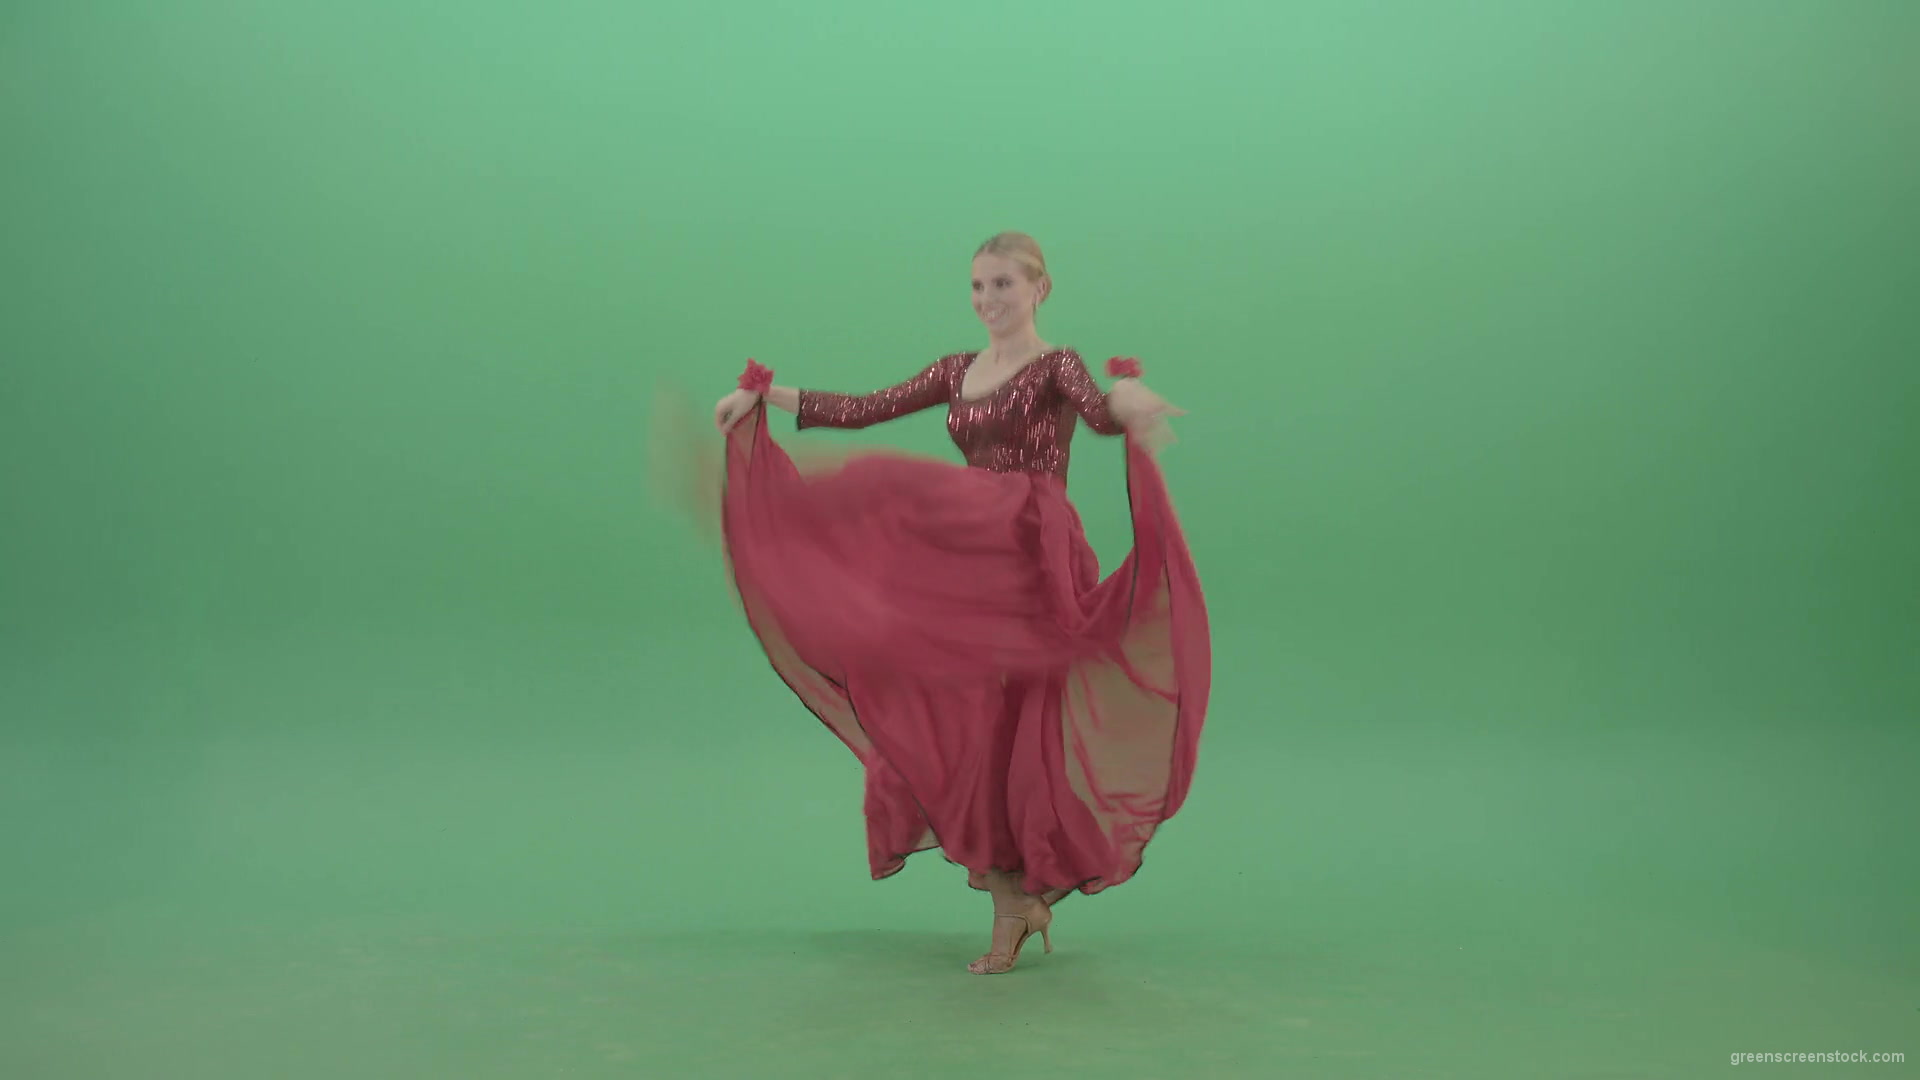 Moulin-rouge-dancing-girl-in-red-dress-jumping-on-green-screen-4K-Video-Footage-1920_008 Green Screen Stock